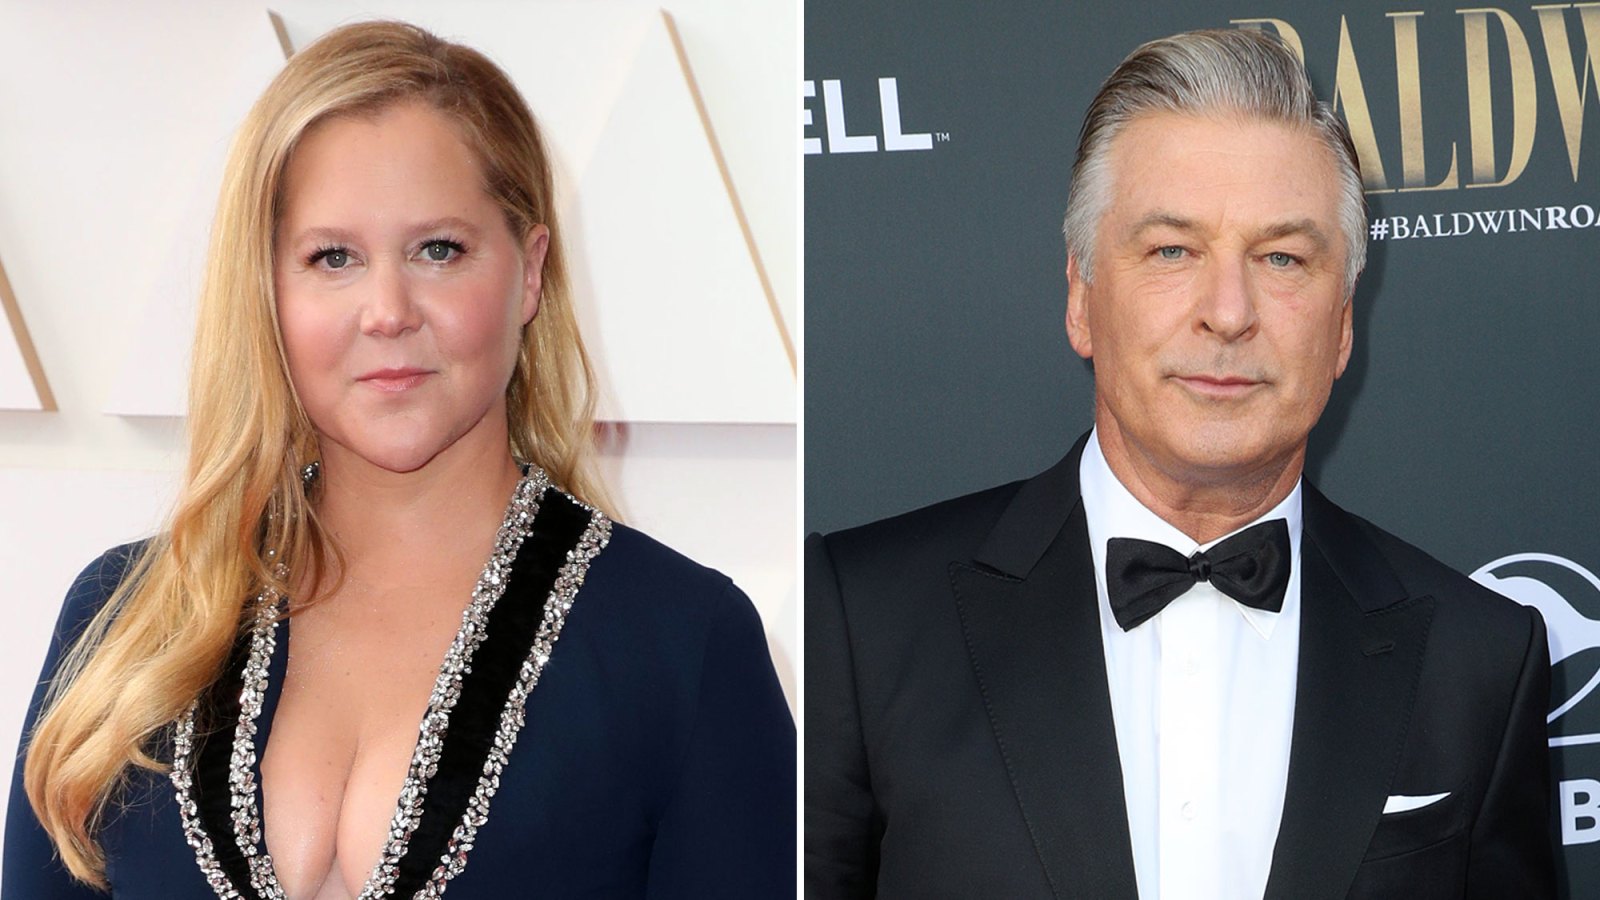 Amy Schumer Revealed She Wasn't Allowed to Make a Joke About Alec Baldwin's Rust Shooting at 2022 Oscars